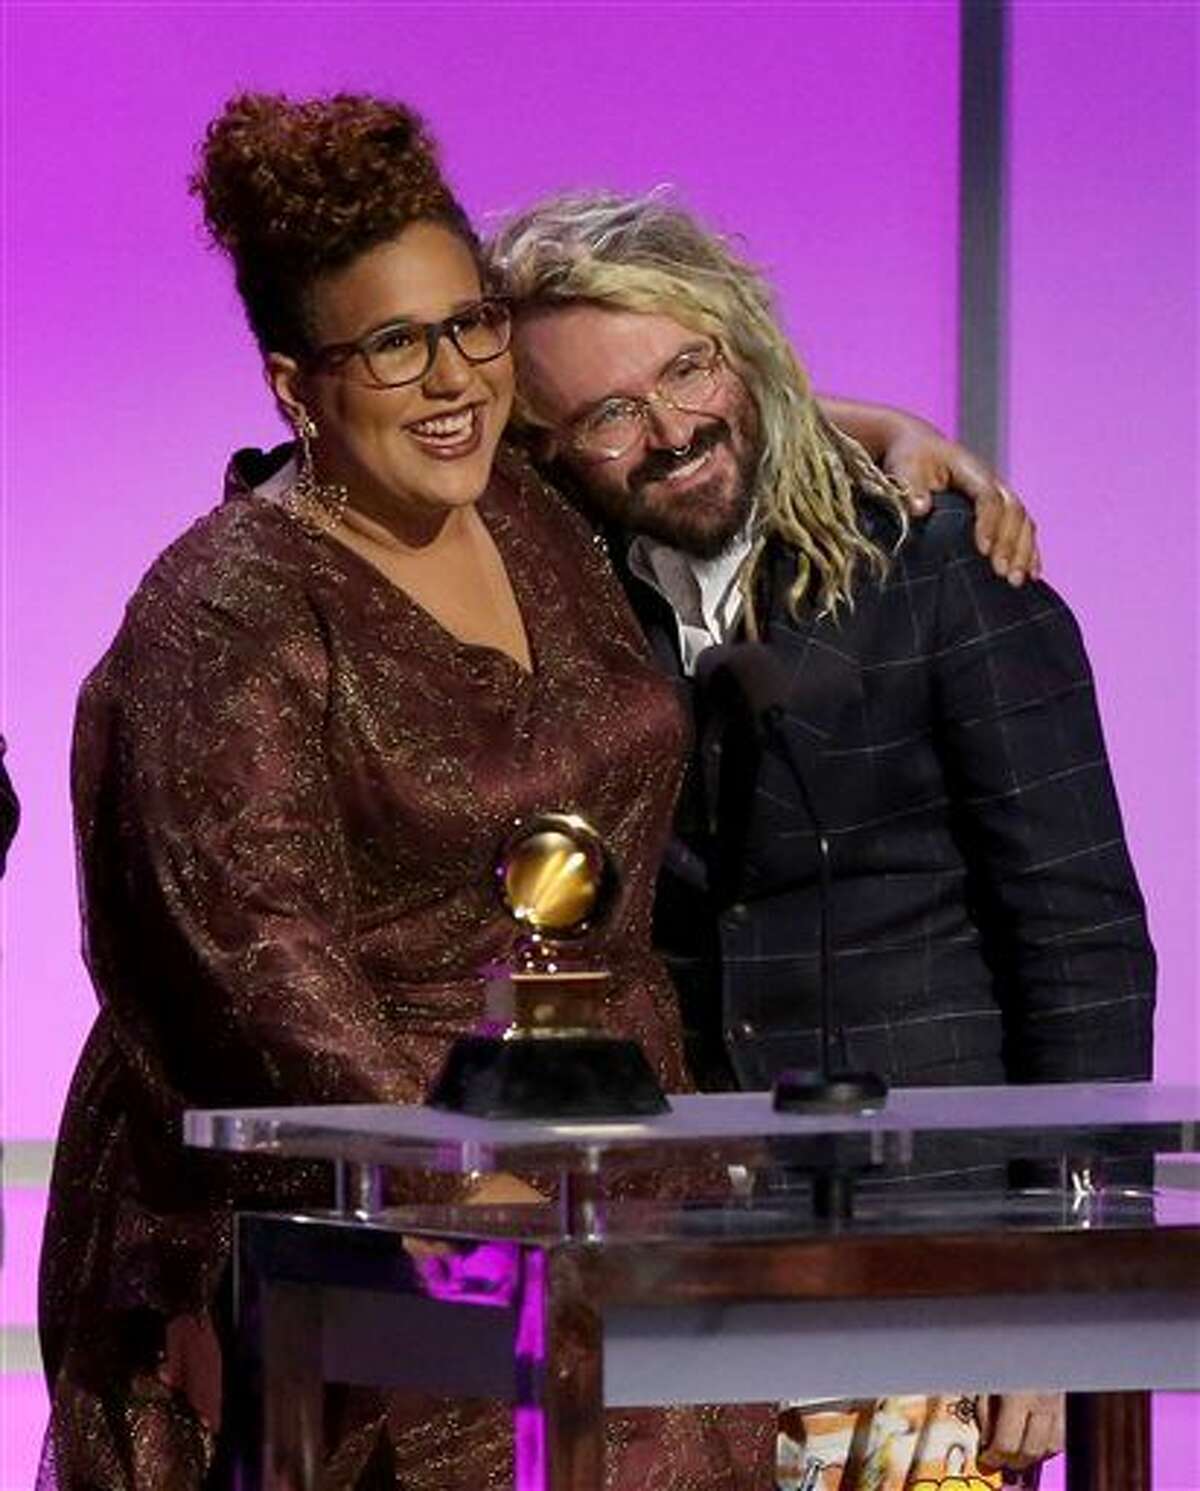 Brittany Howard, left, of Alabama Shakes, and Shawn Everett accept the award for best alternative music album for “Sound & Color” at the 58th annual Grammy Awards on Monday, Feb. 15, 2016, in Los Angeles.